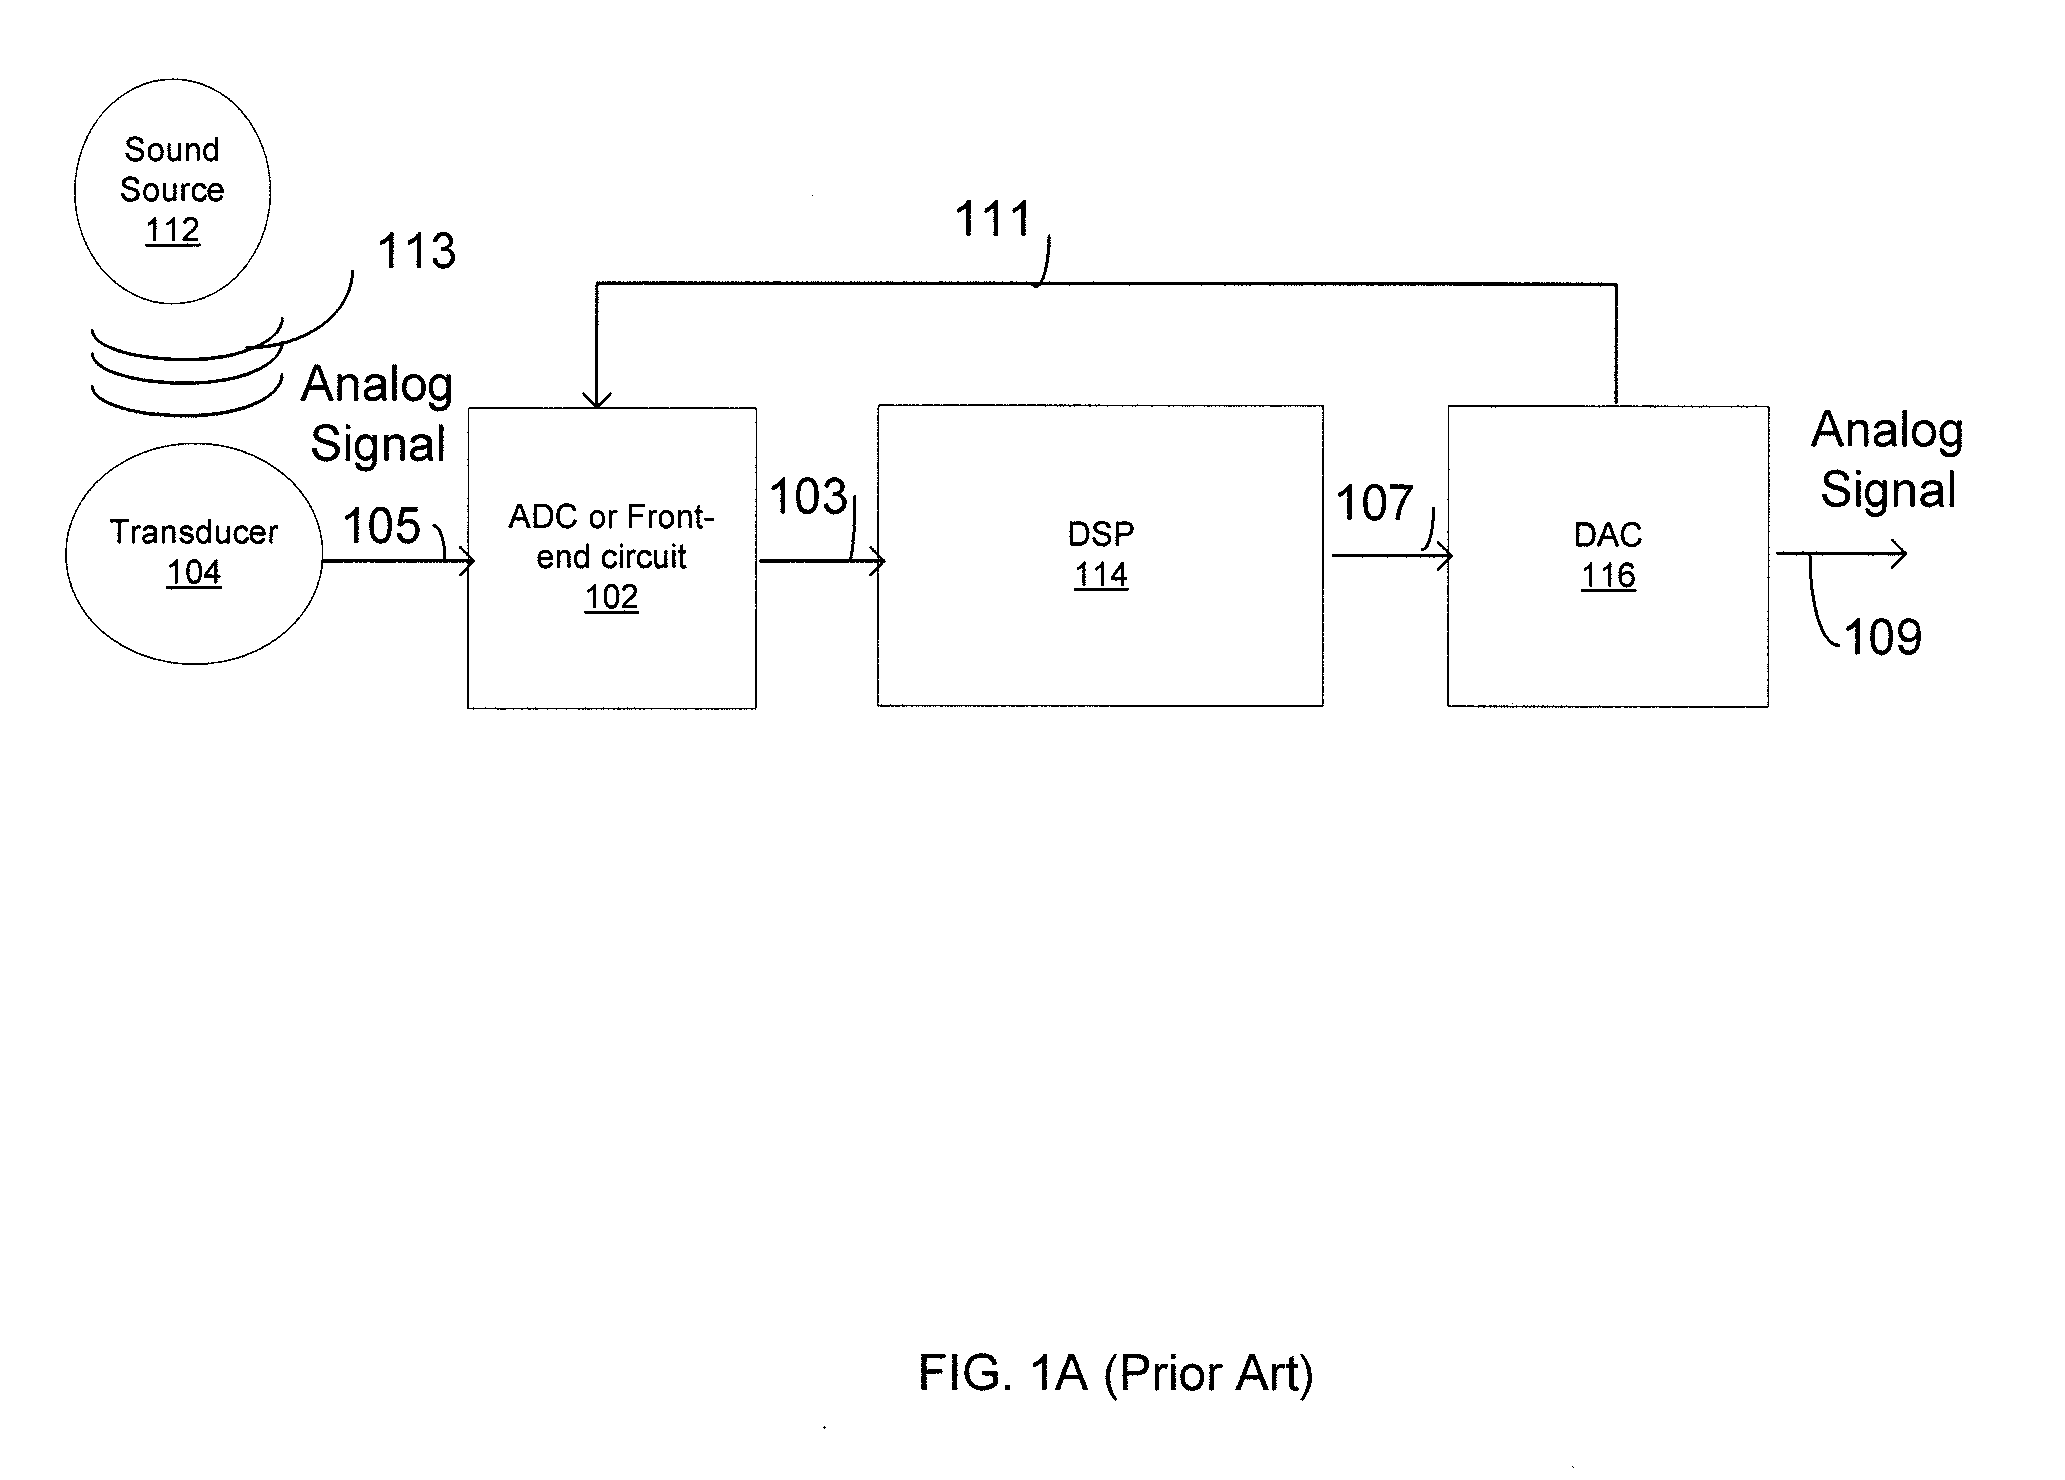 Acoustic Sensor With An Acoustic Object Detector For Reducing Power Consumption In Front-End Circuit